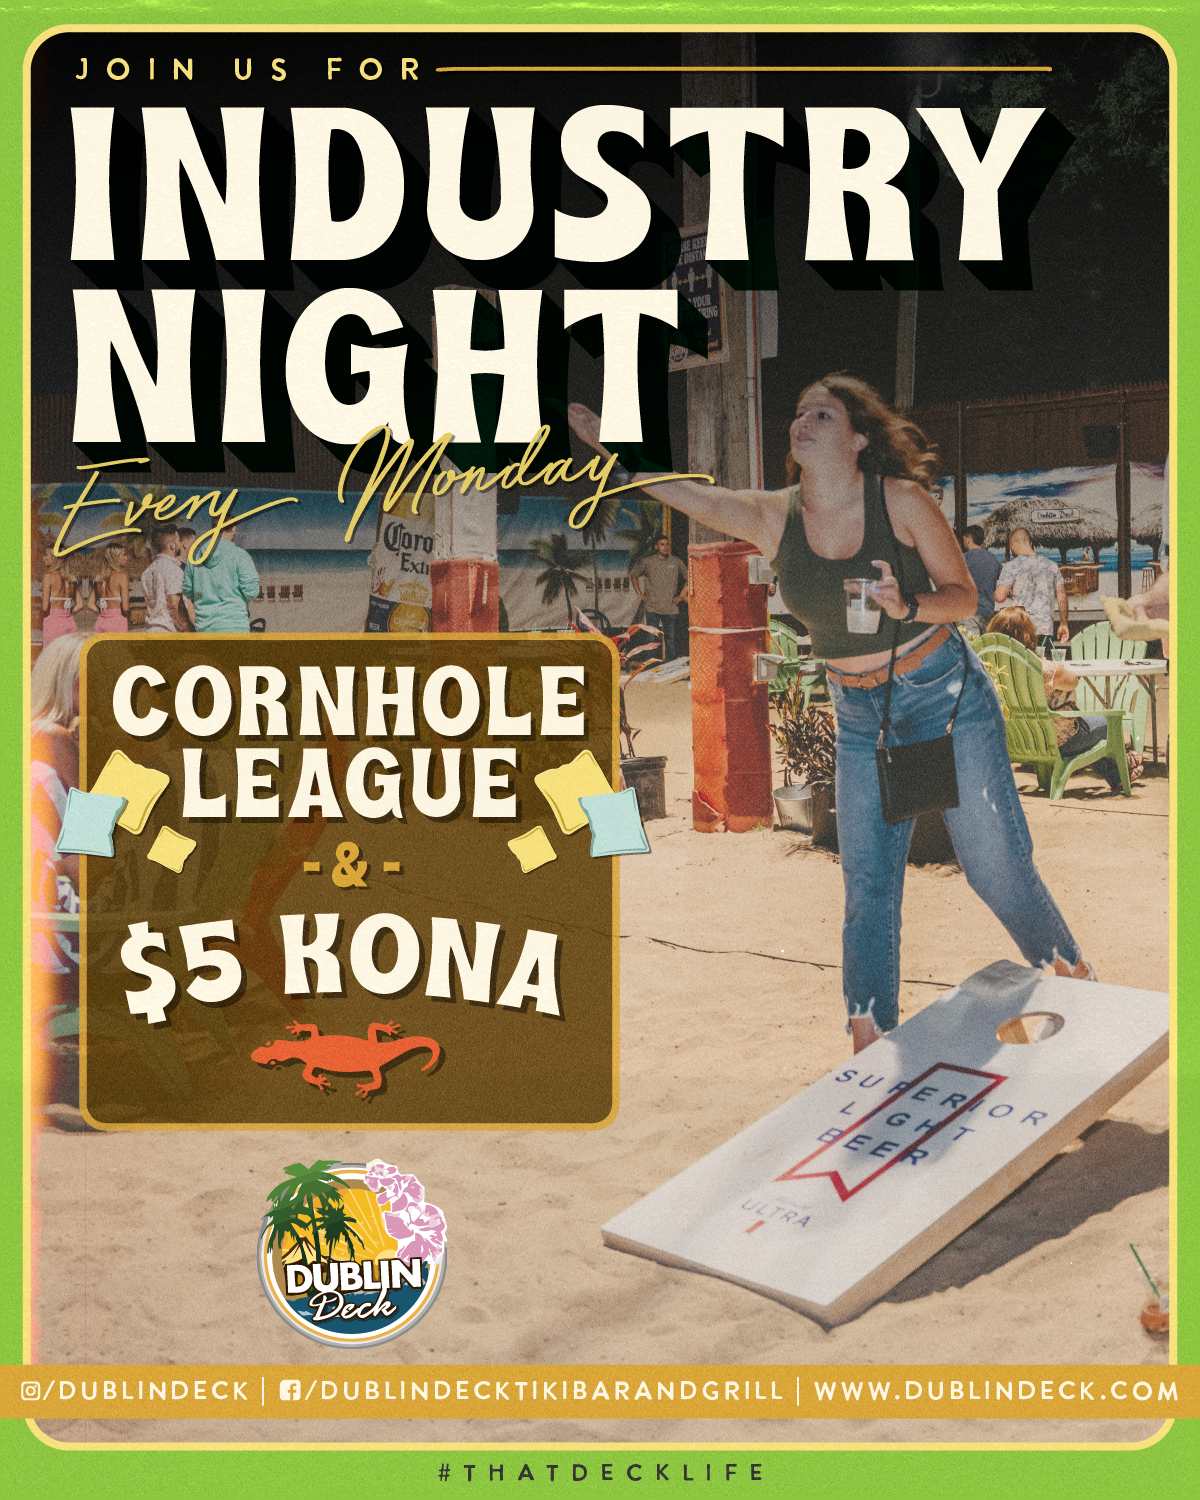 Hang out with us every Monday for Industry Night! We'll have the Dublin Deck Cornhole League games goin' along with $5 Konas all night long! 